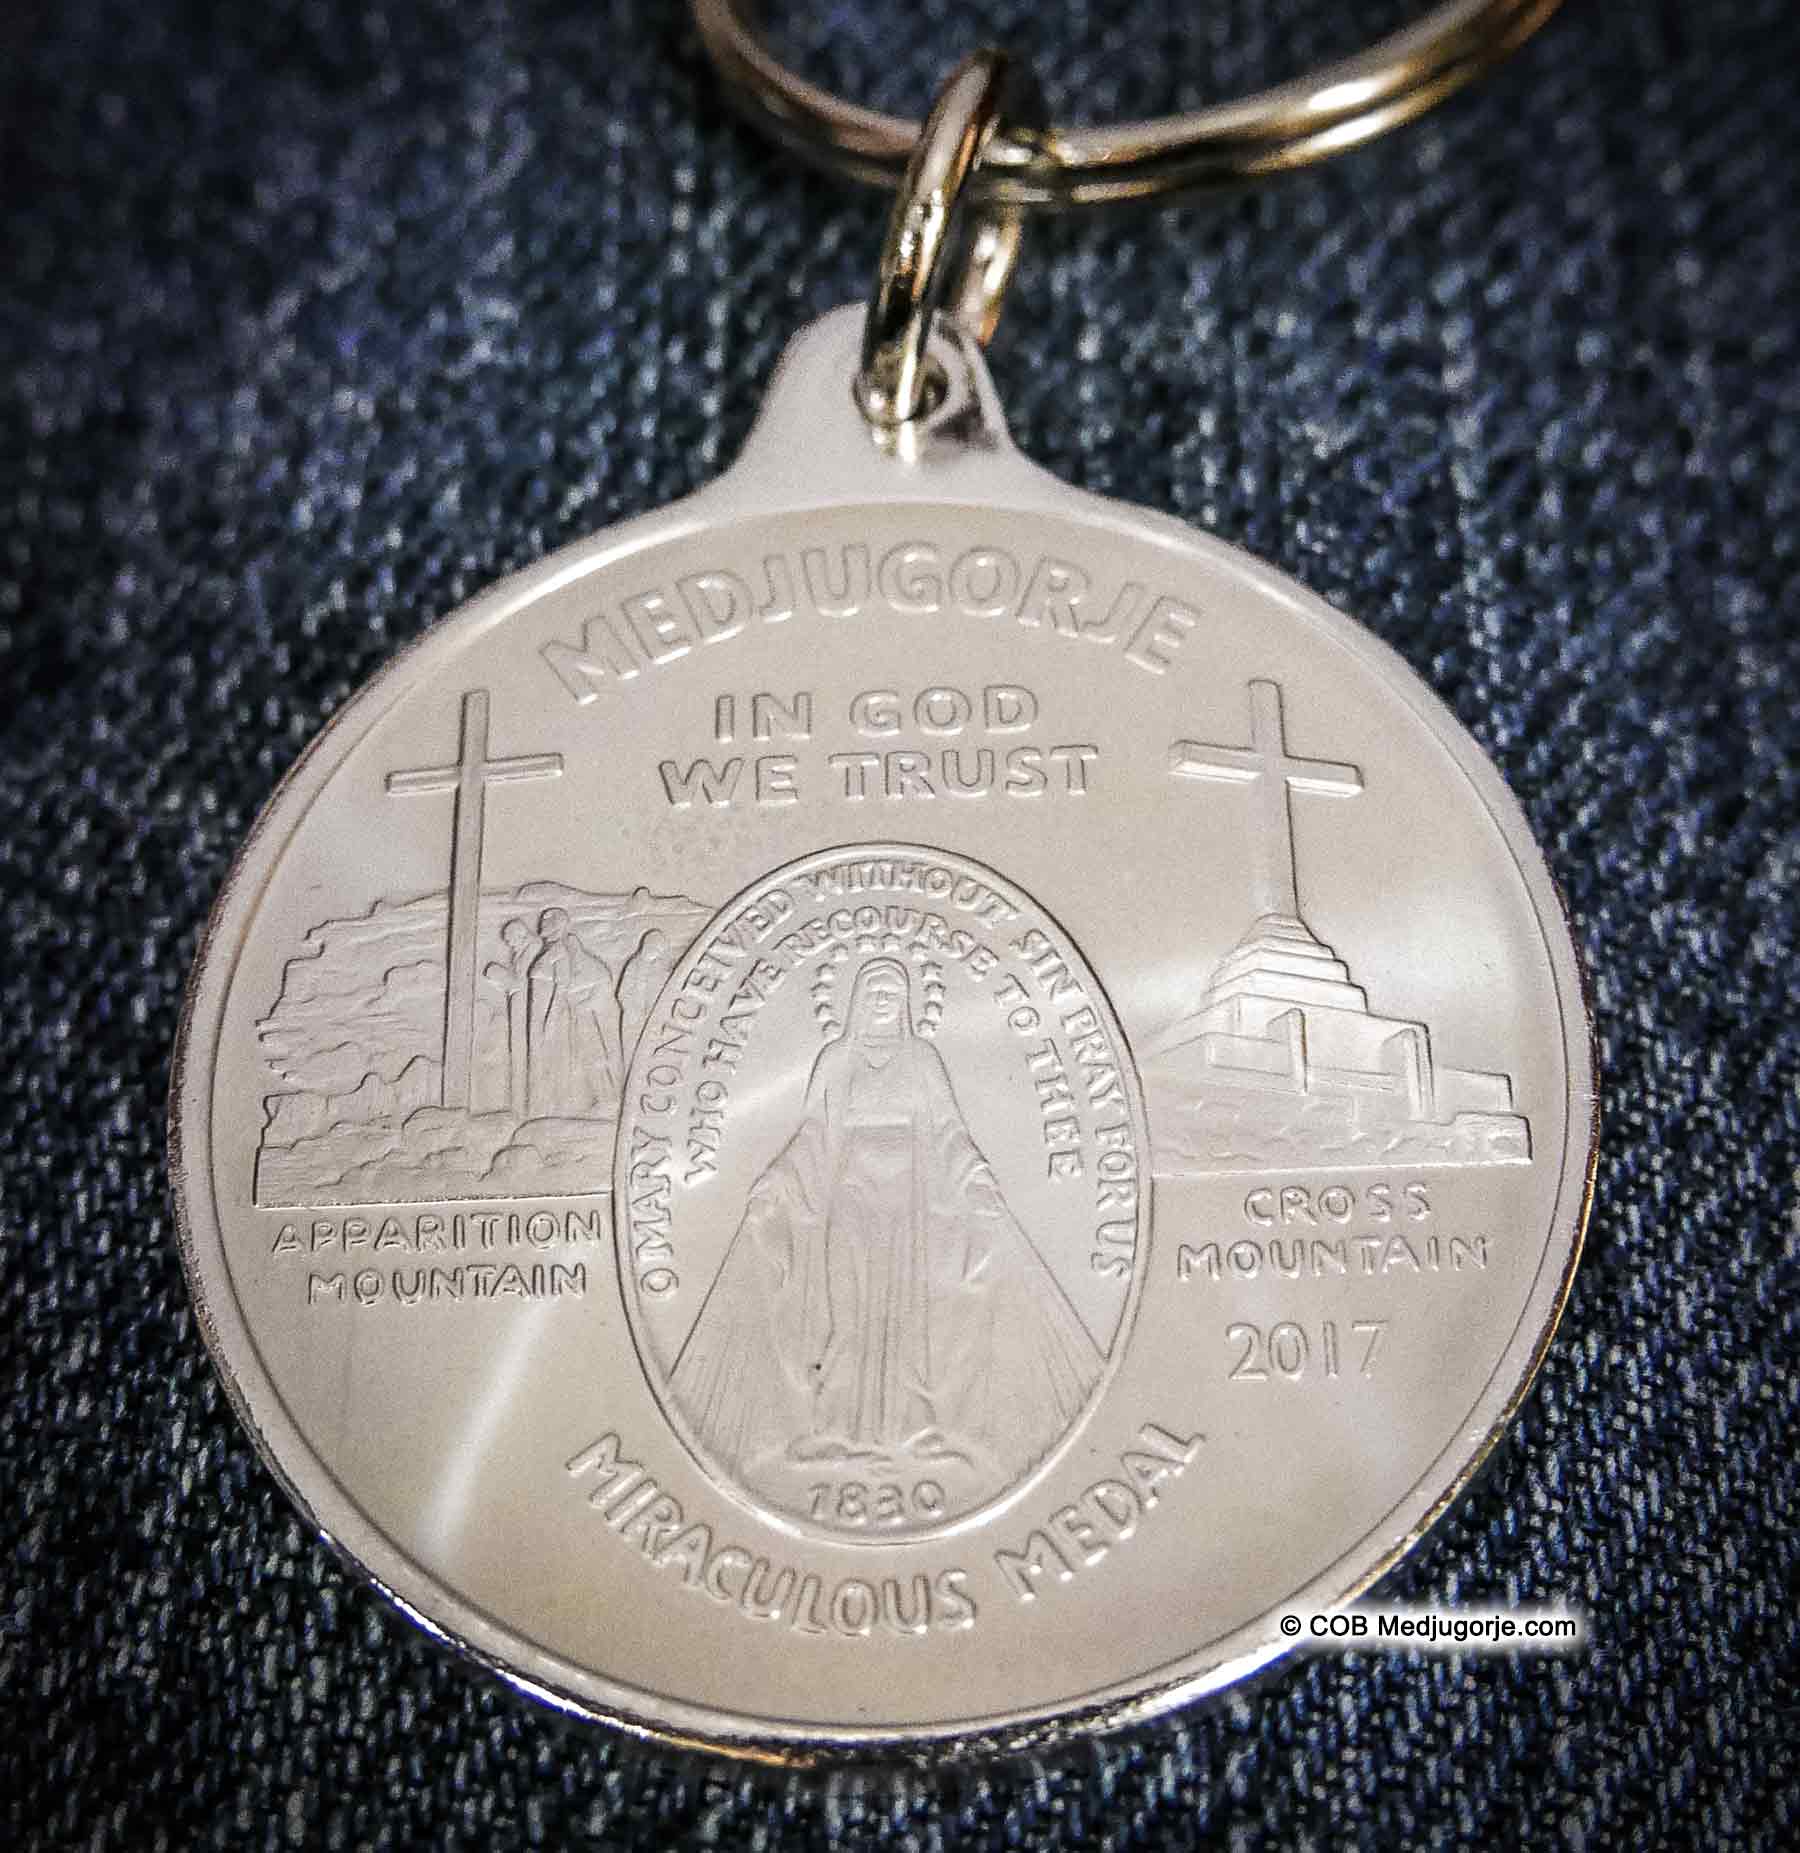 The Miraculous Medal Medjugorje Silver Round Keychain